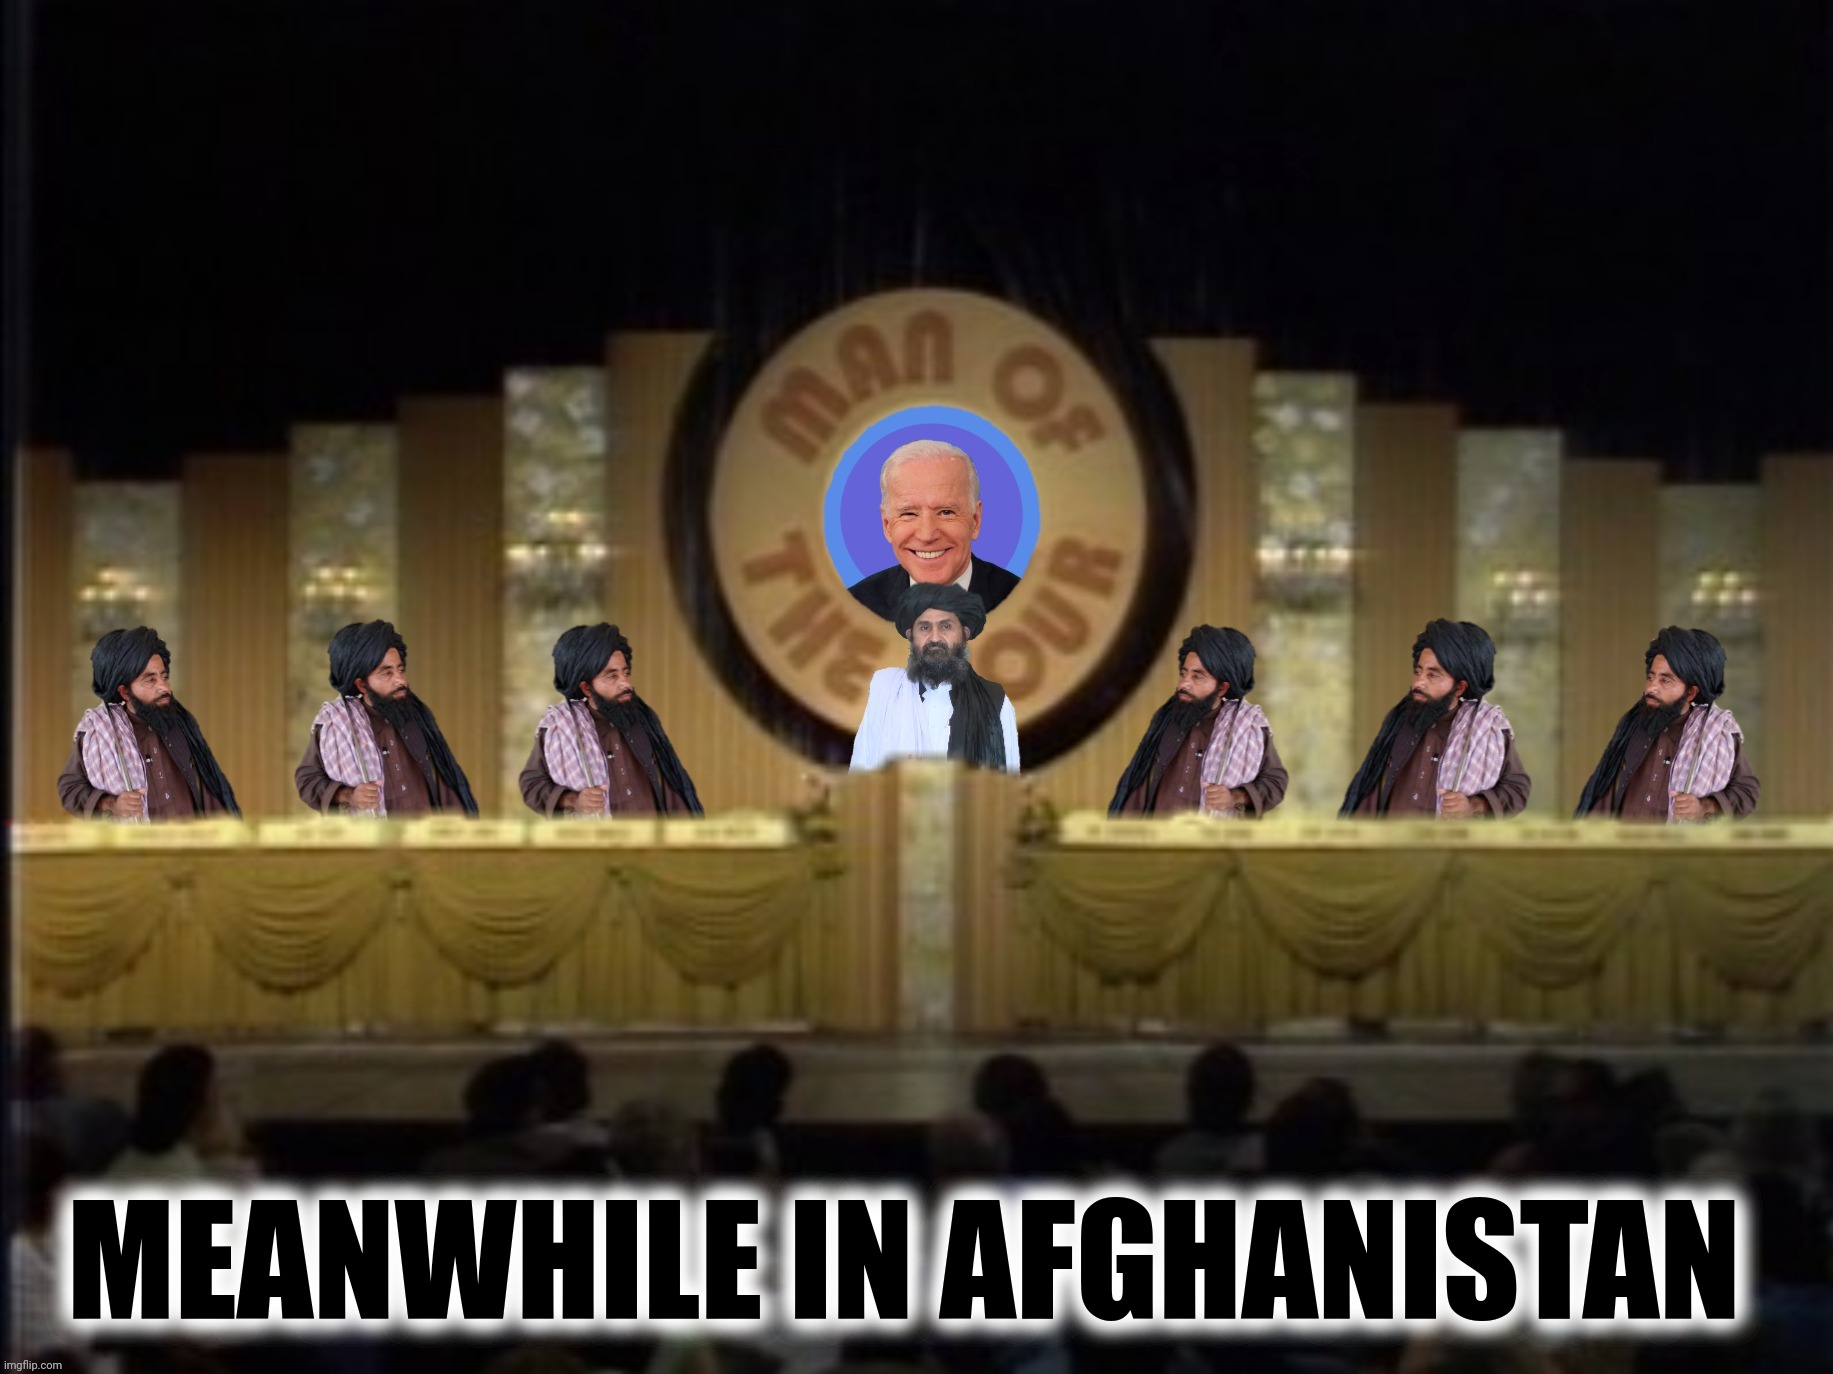 MEANWHILE IN AFGHANISTAN | made w/ Imgflip meme maker